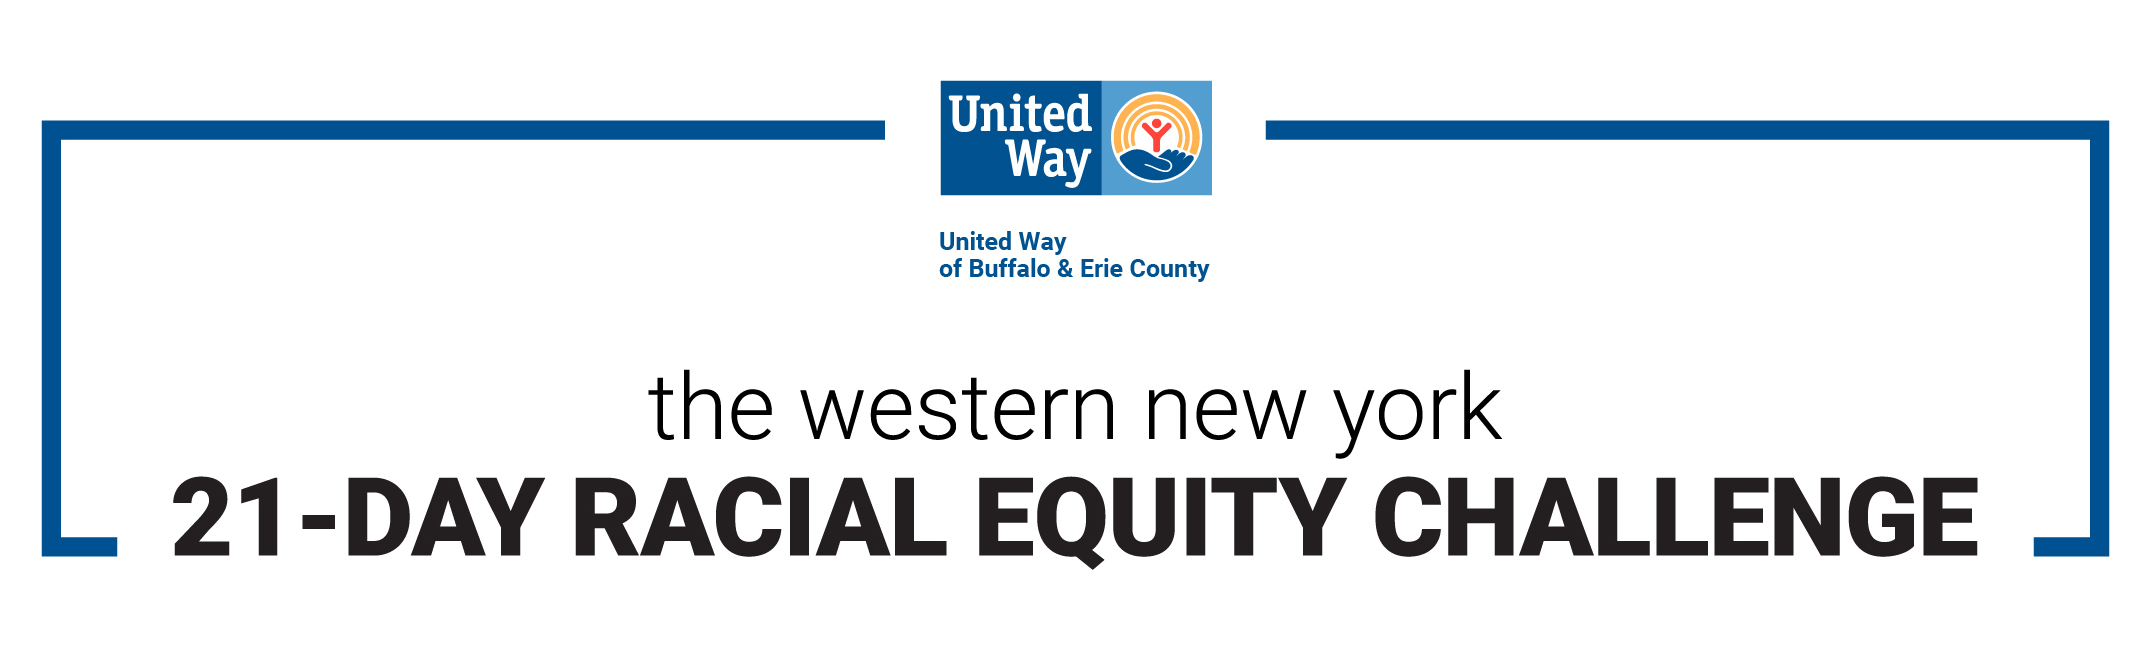 The Western New York 21-Day Racial Equity Challenge Day 5